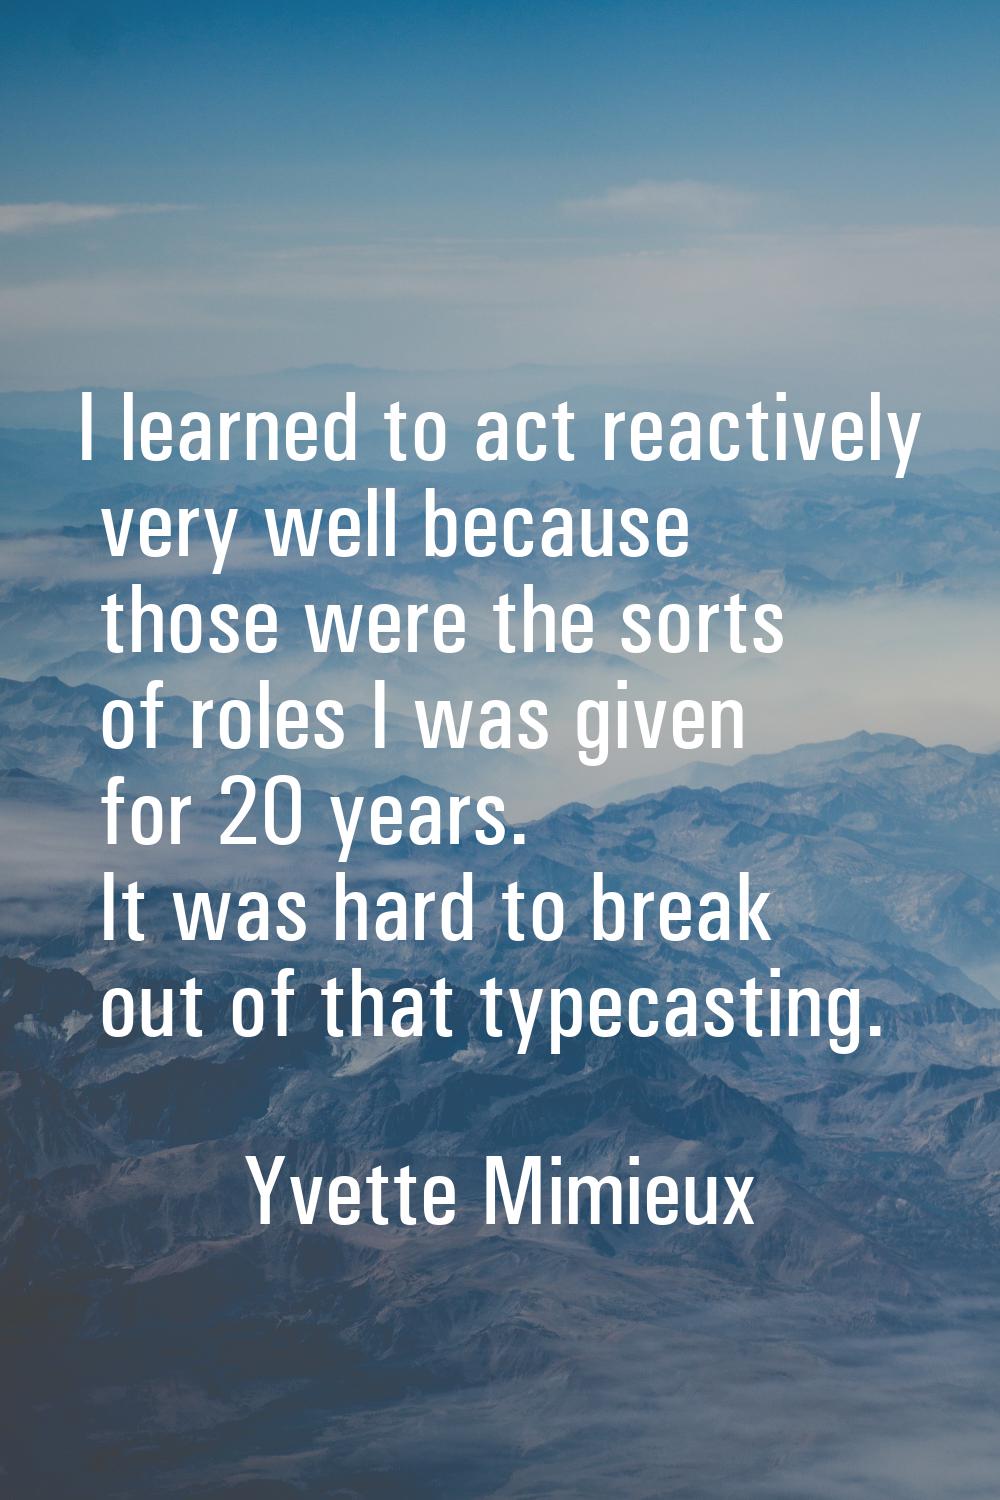 I learned to act reactively very well because those were the sorts of roles I was given for 20 year